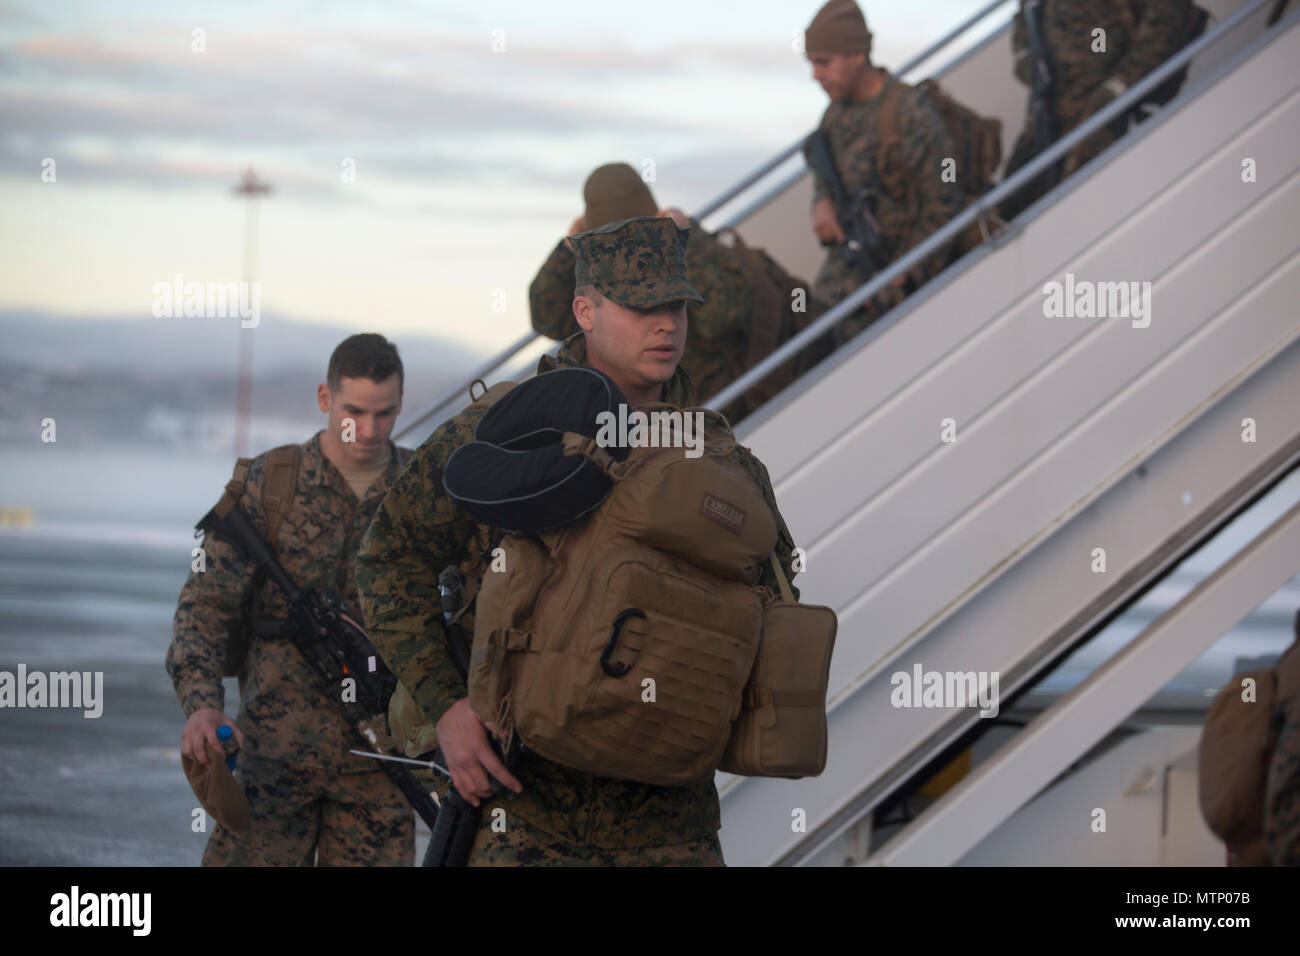 U.S. Marines disembark the plane at Vaernes Garnison, Norway, Jan. 16, 2017. The Marines with Black Sea Rotational Force 17.1 arrived at Vaernes Garnison early in the morning as part of Marine Rotational Force Europe 17.1. (U.S. Marine Corps photo by Lance Cpl. Victoria Ross) Stock Photo